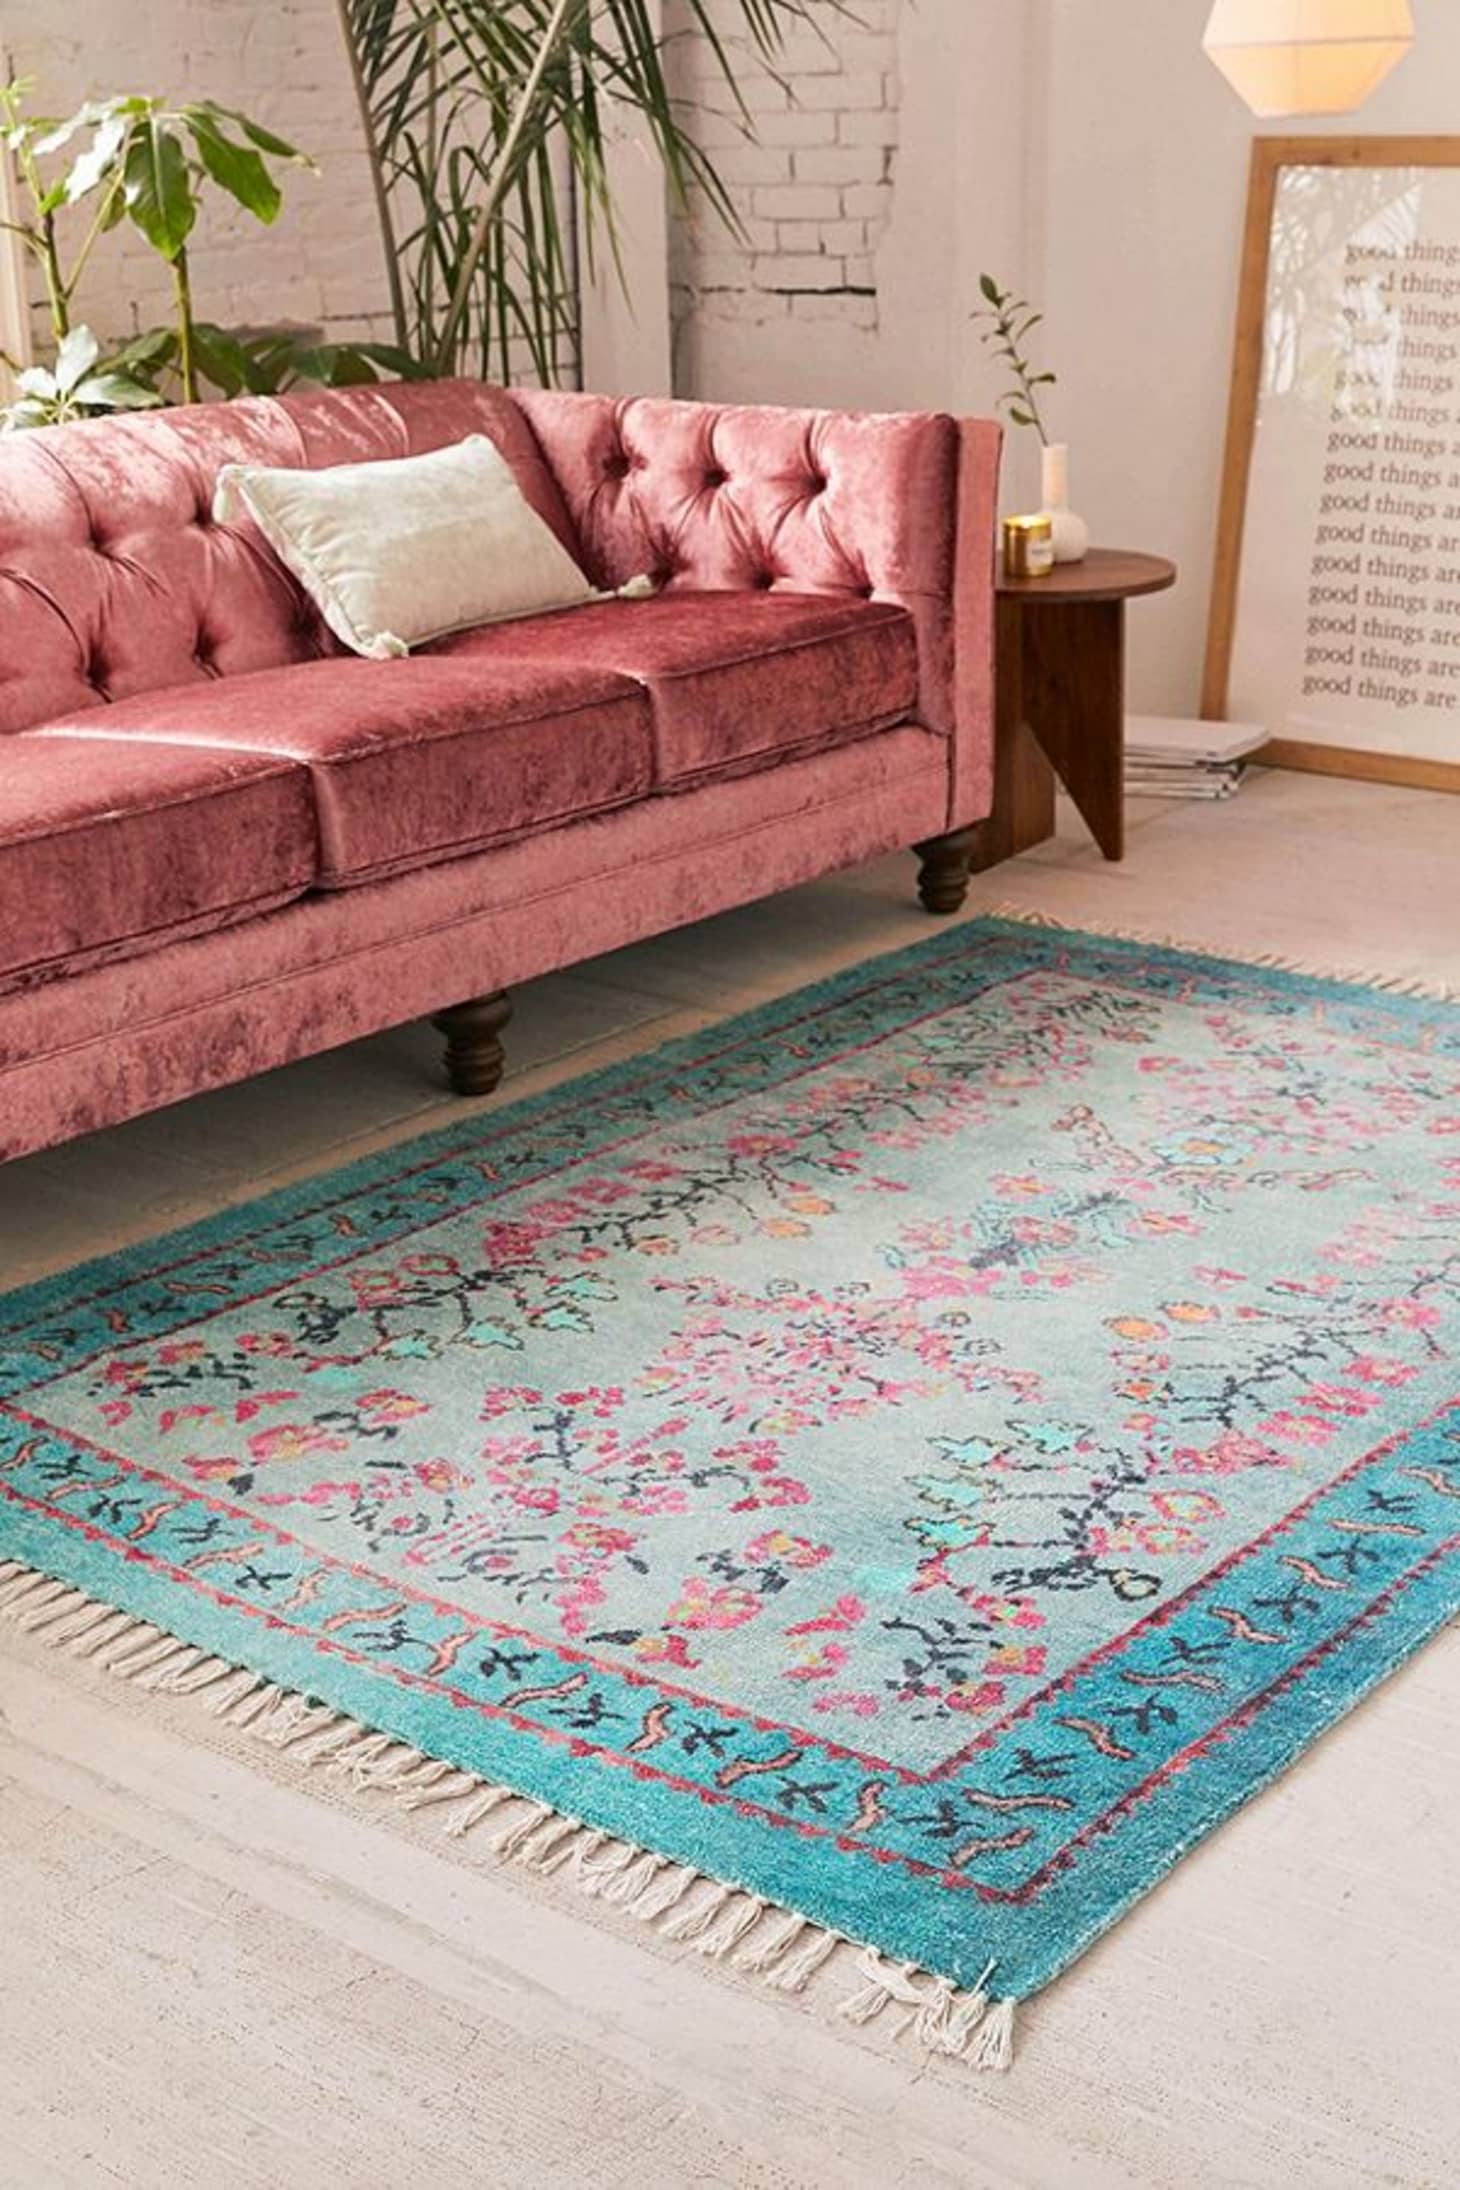 Style on a Budget: 10 Sources for Good, Cheap Rugs | Apartment Therapy